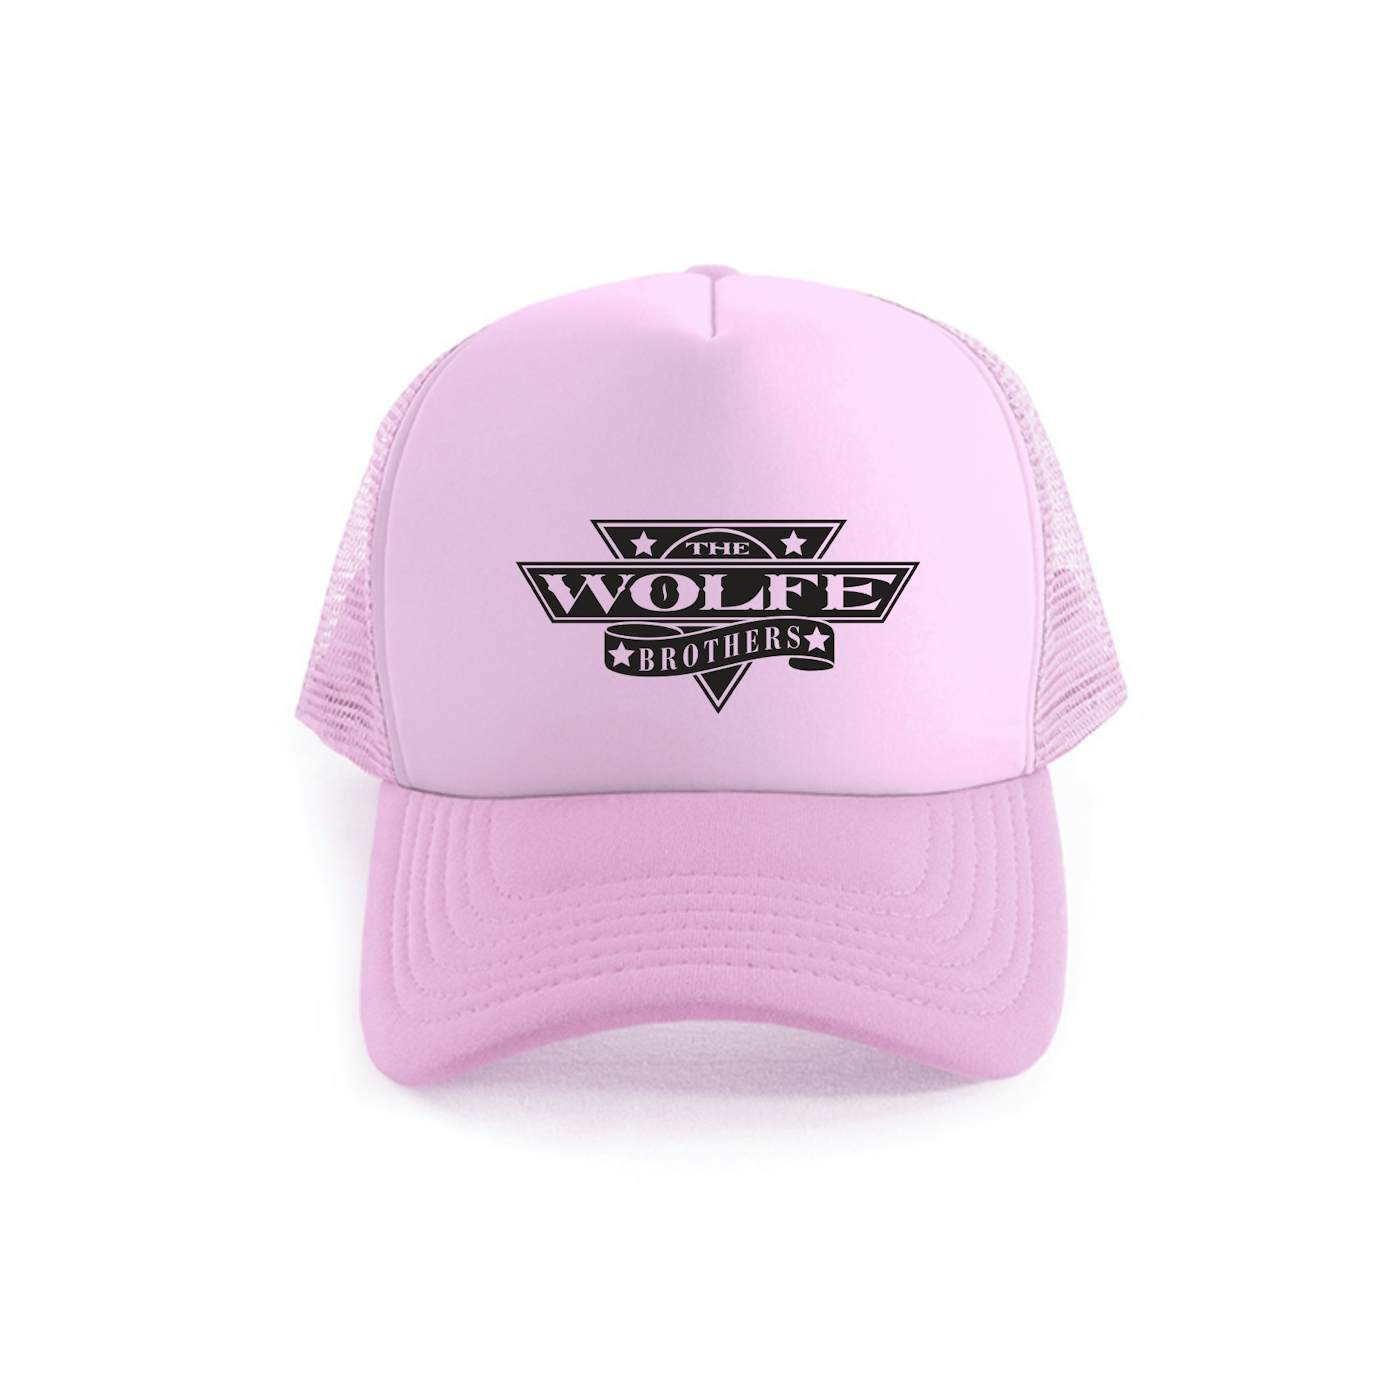 The Wolfe Brothers - Pink Trucker Cap